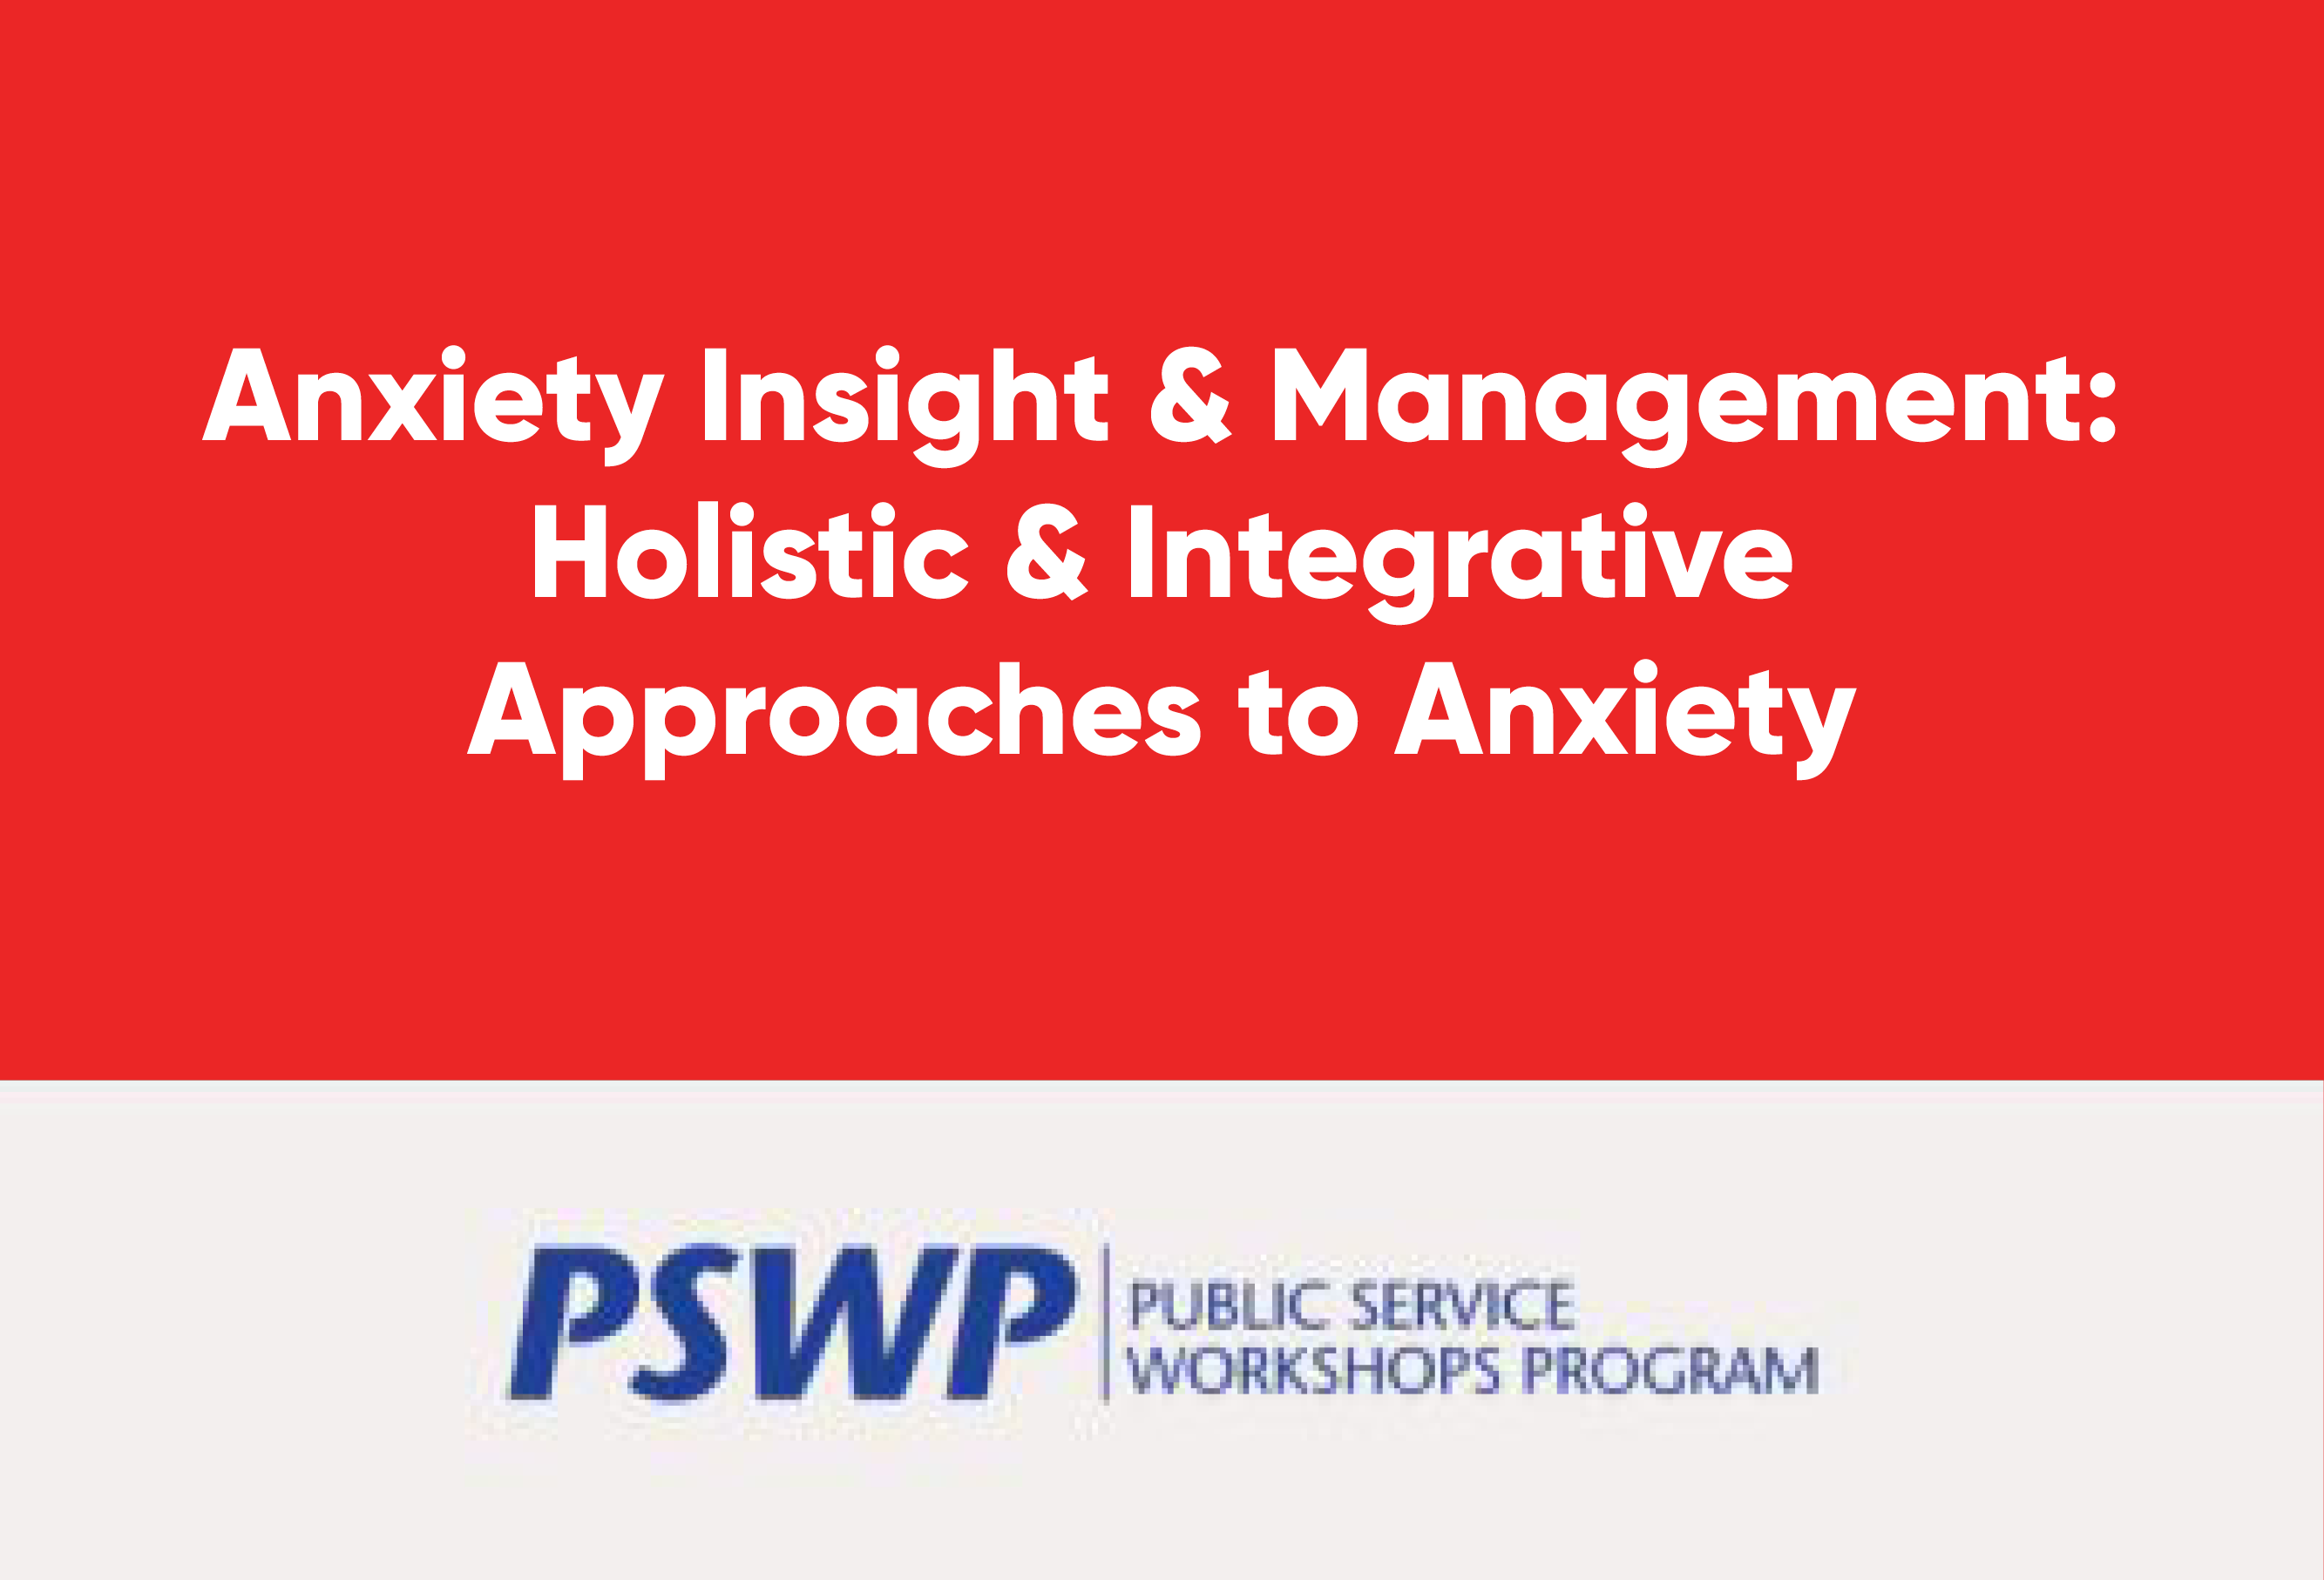 May 31: Anxiety Insight and Management: Holistic and Integrative Approaches to Anxiety